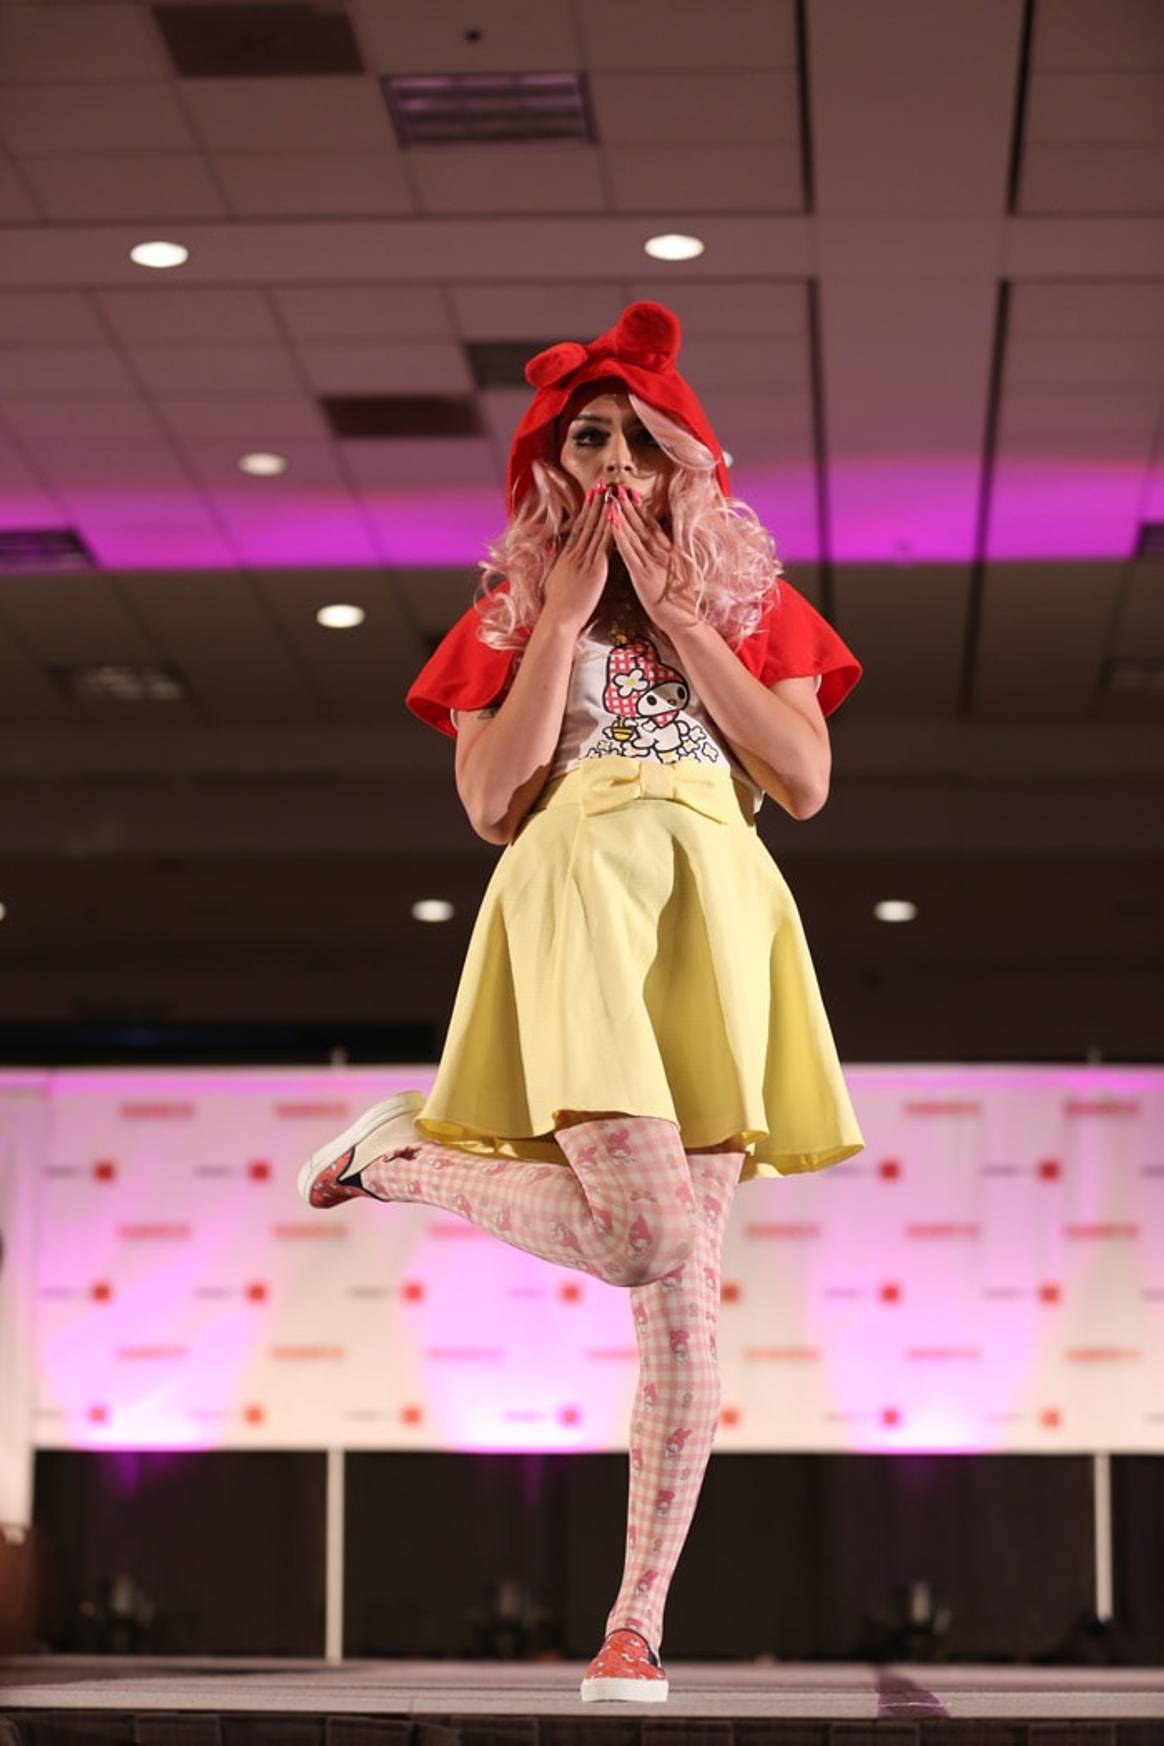 JapanLA and My Melody bring fashion show to Anime Expo